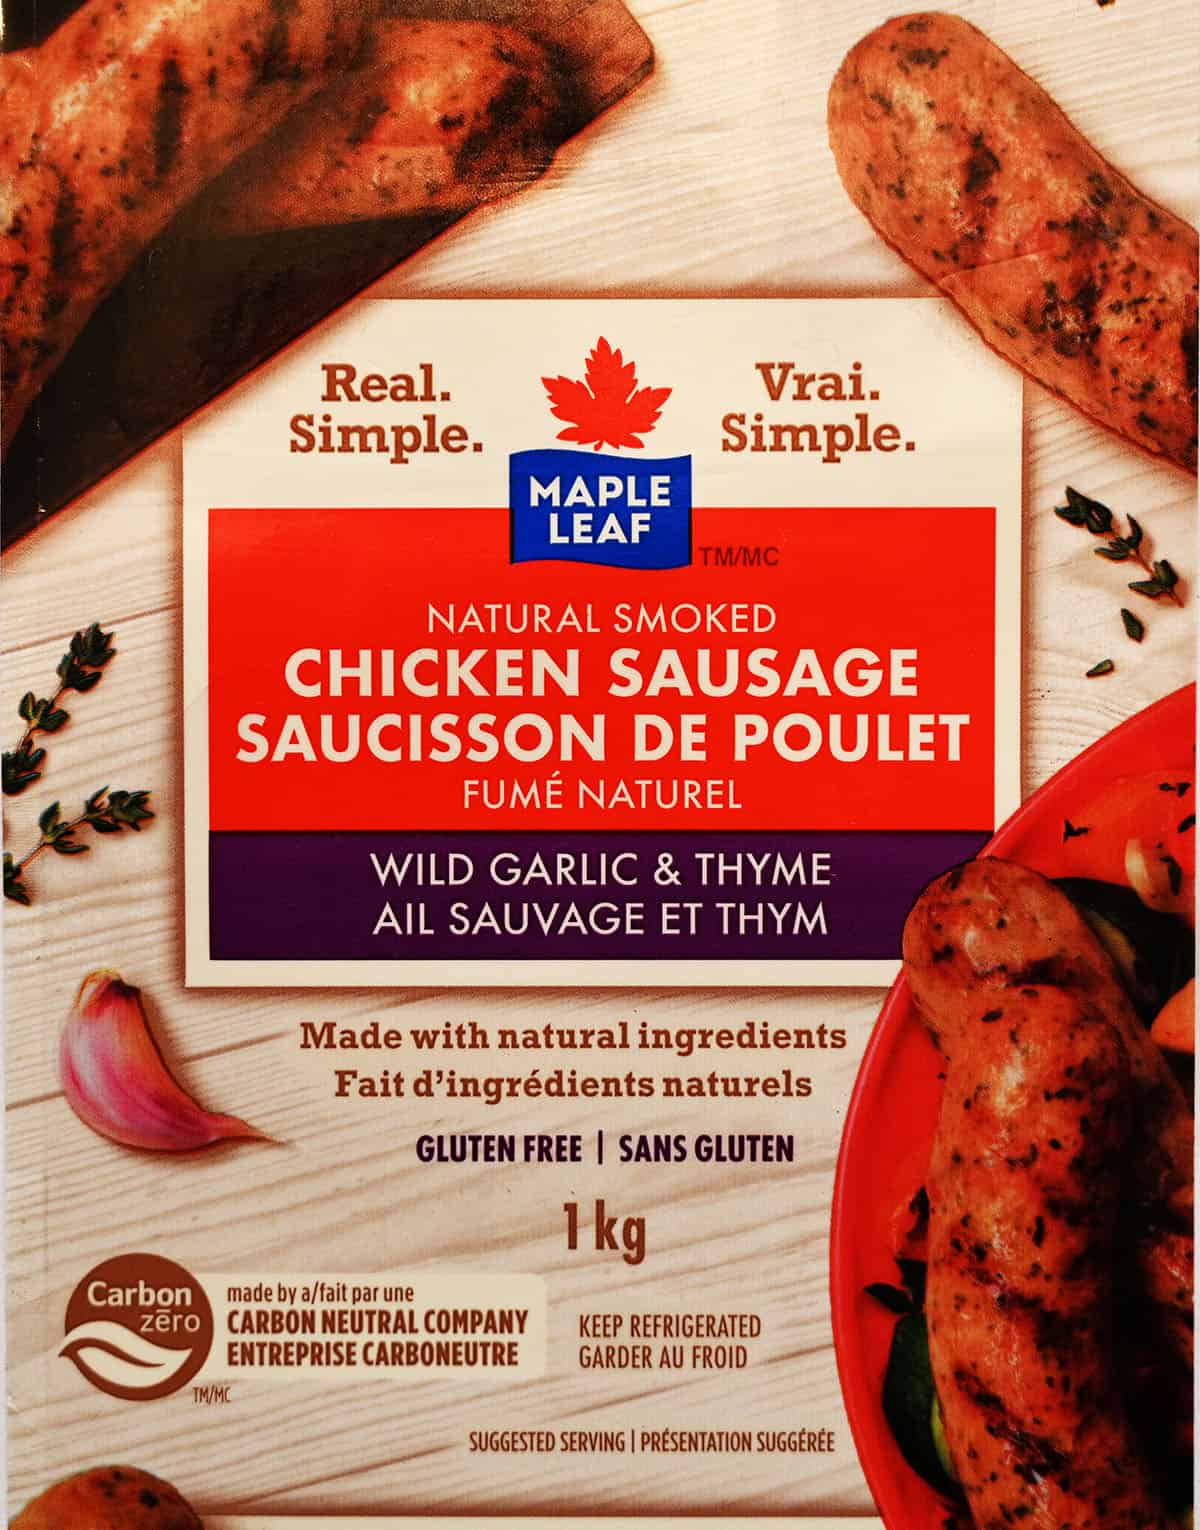 Closeup image of the front label on the chicken sausage.